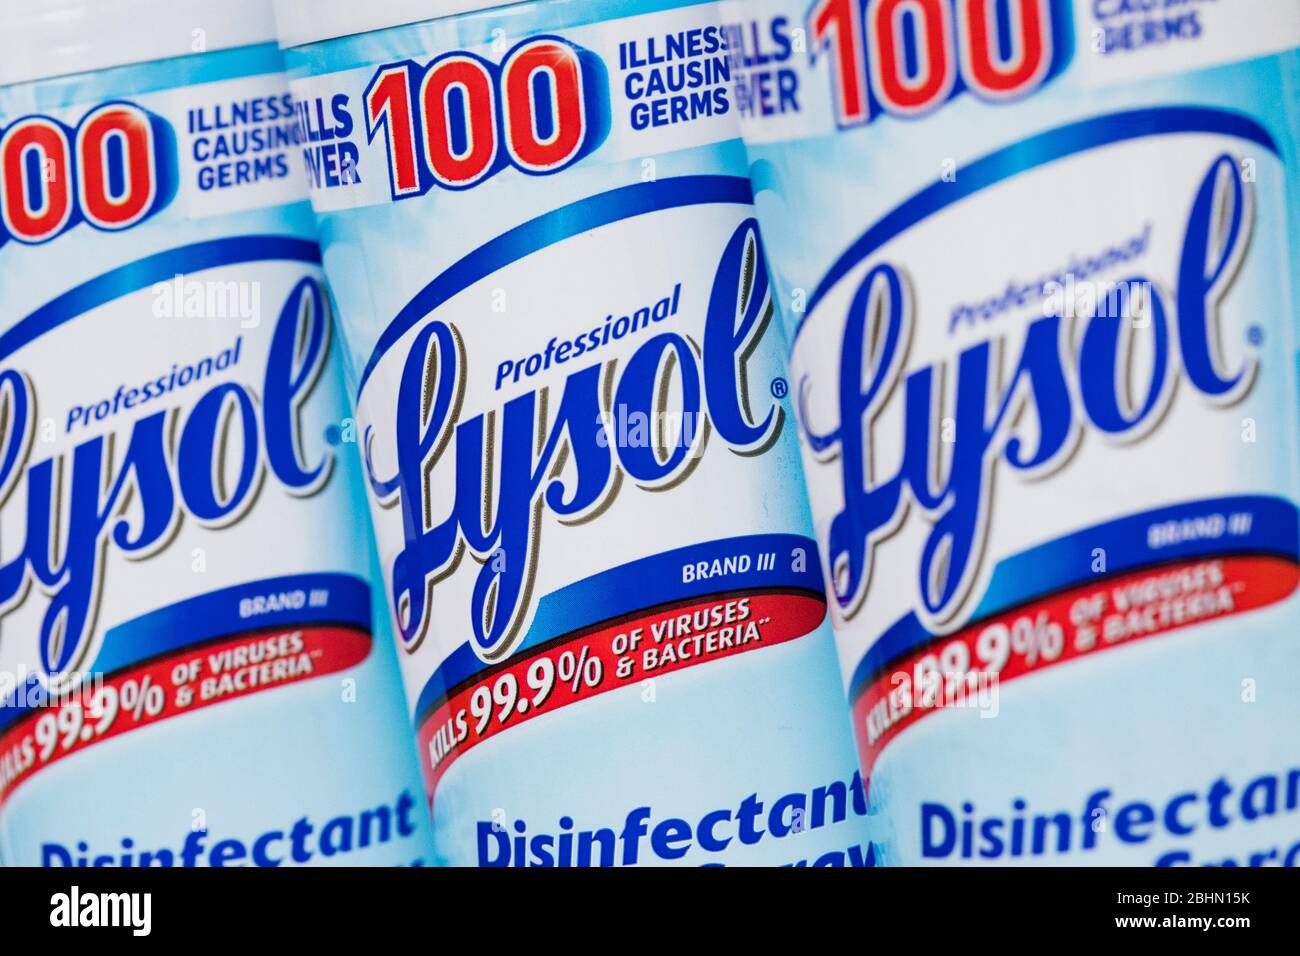 A grouping of Lysol disinfectant products arranged for a photograph. Stock Photo